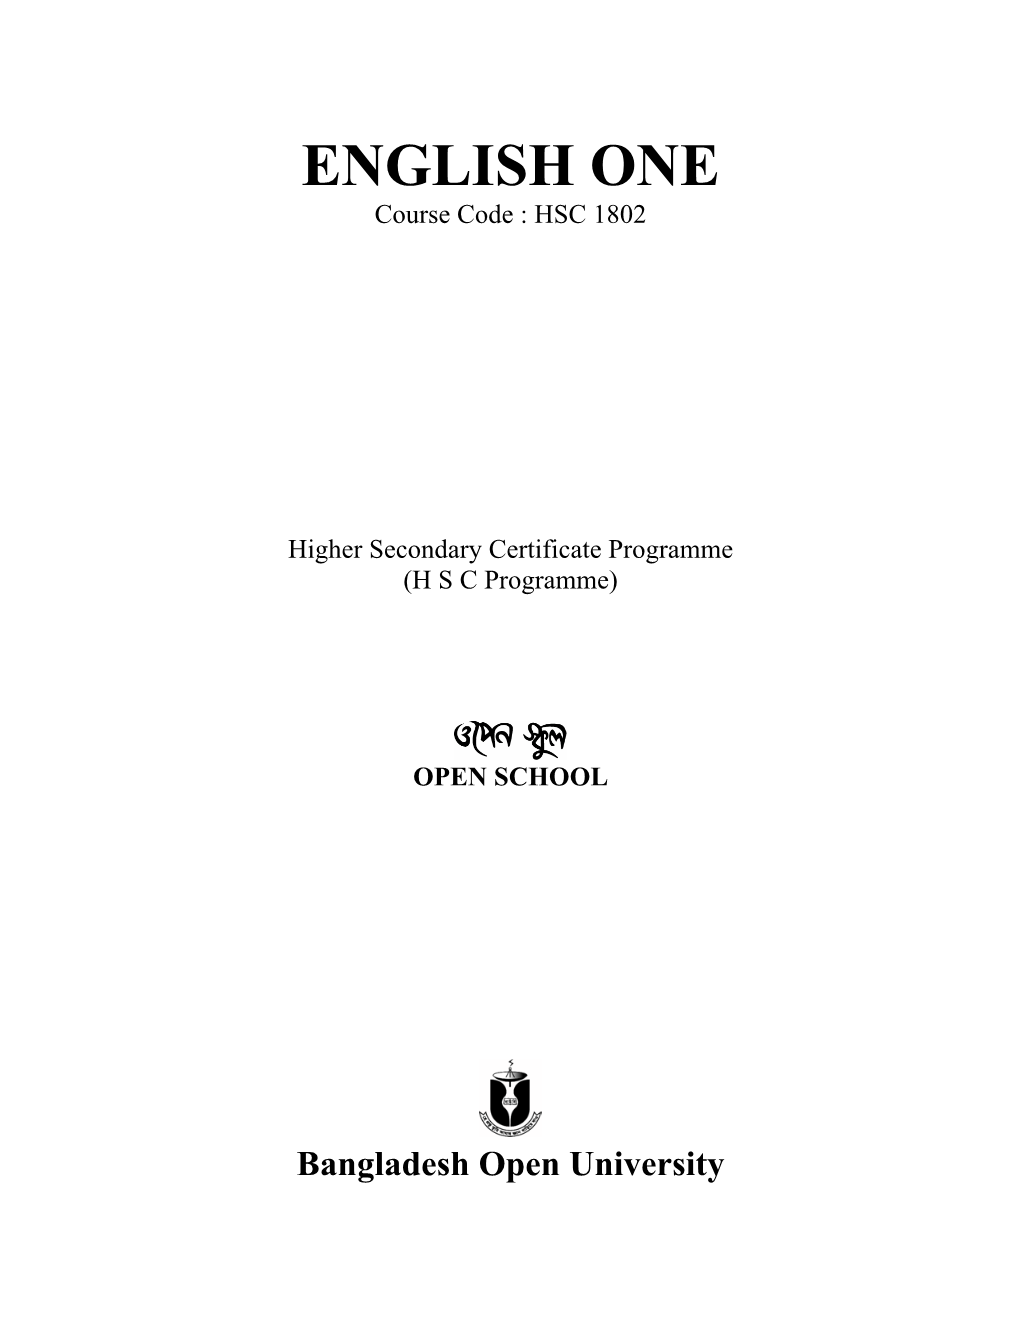 ENGLISH ONE Course Code : HSC 1802